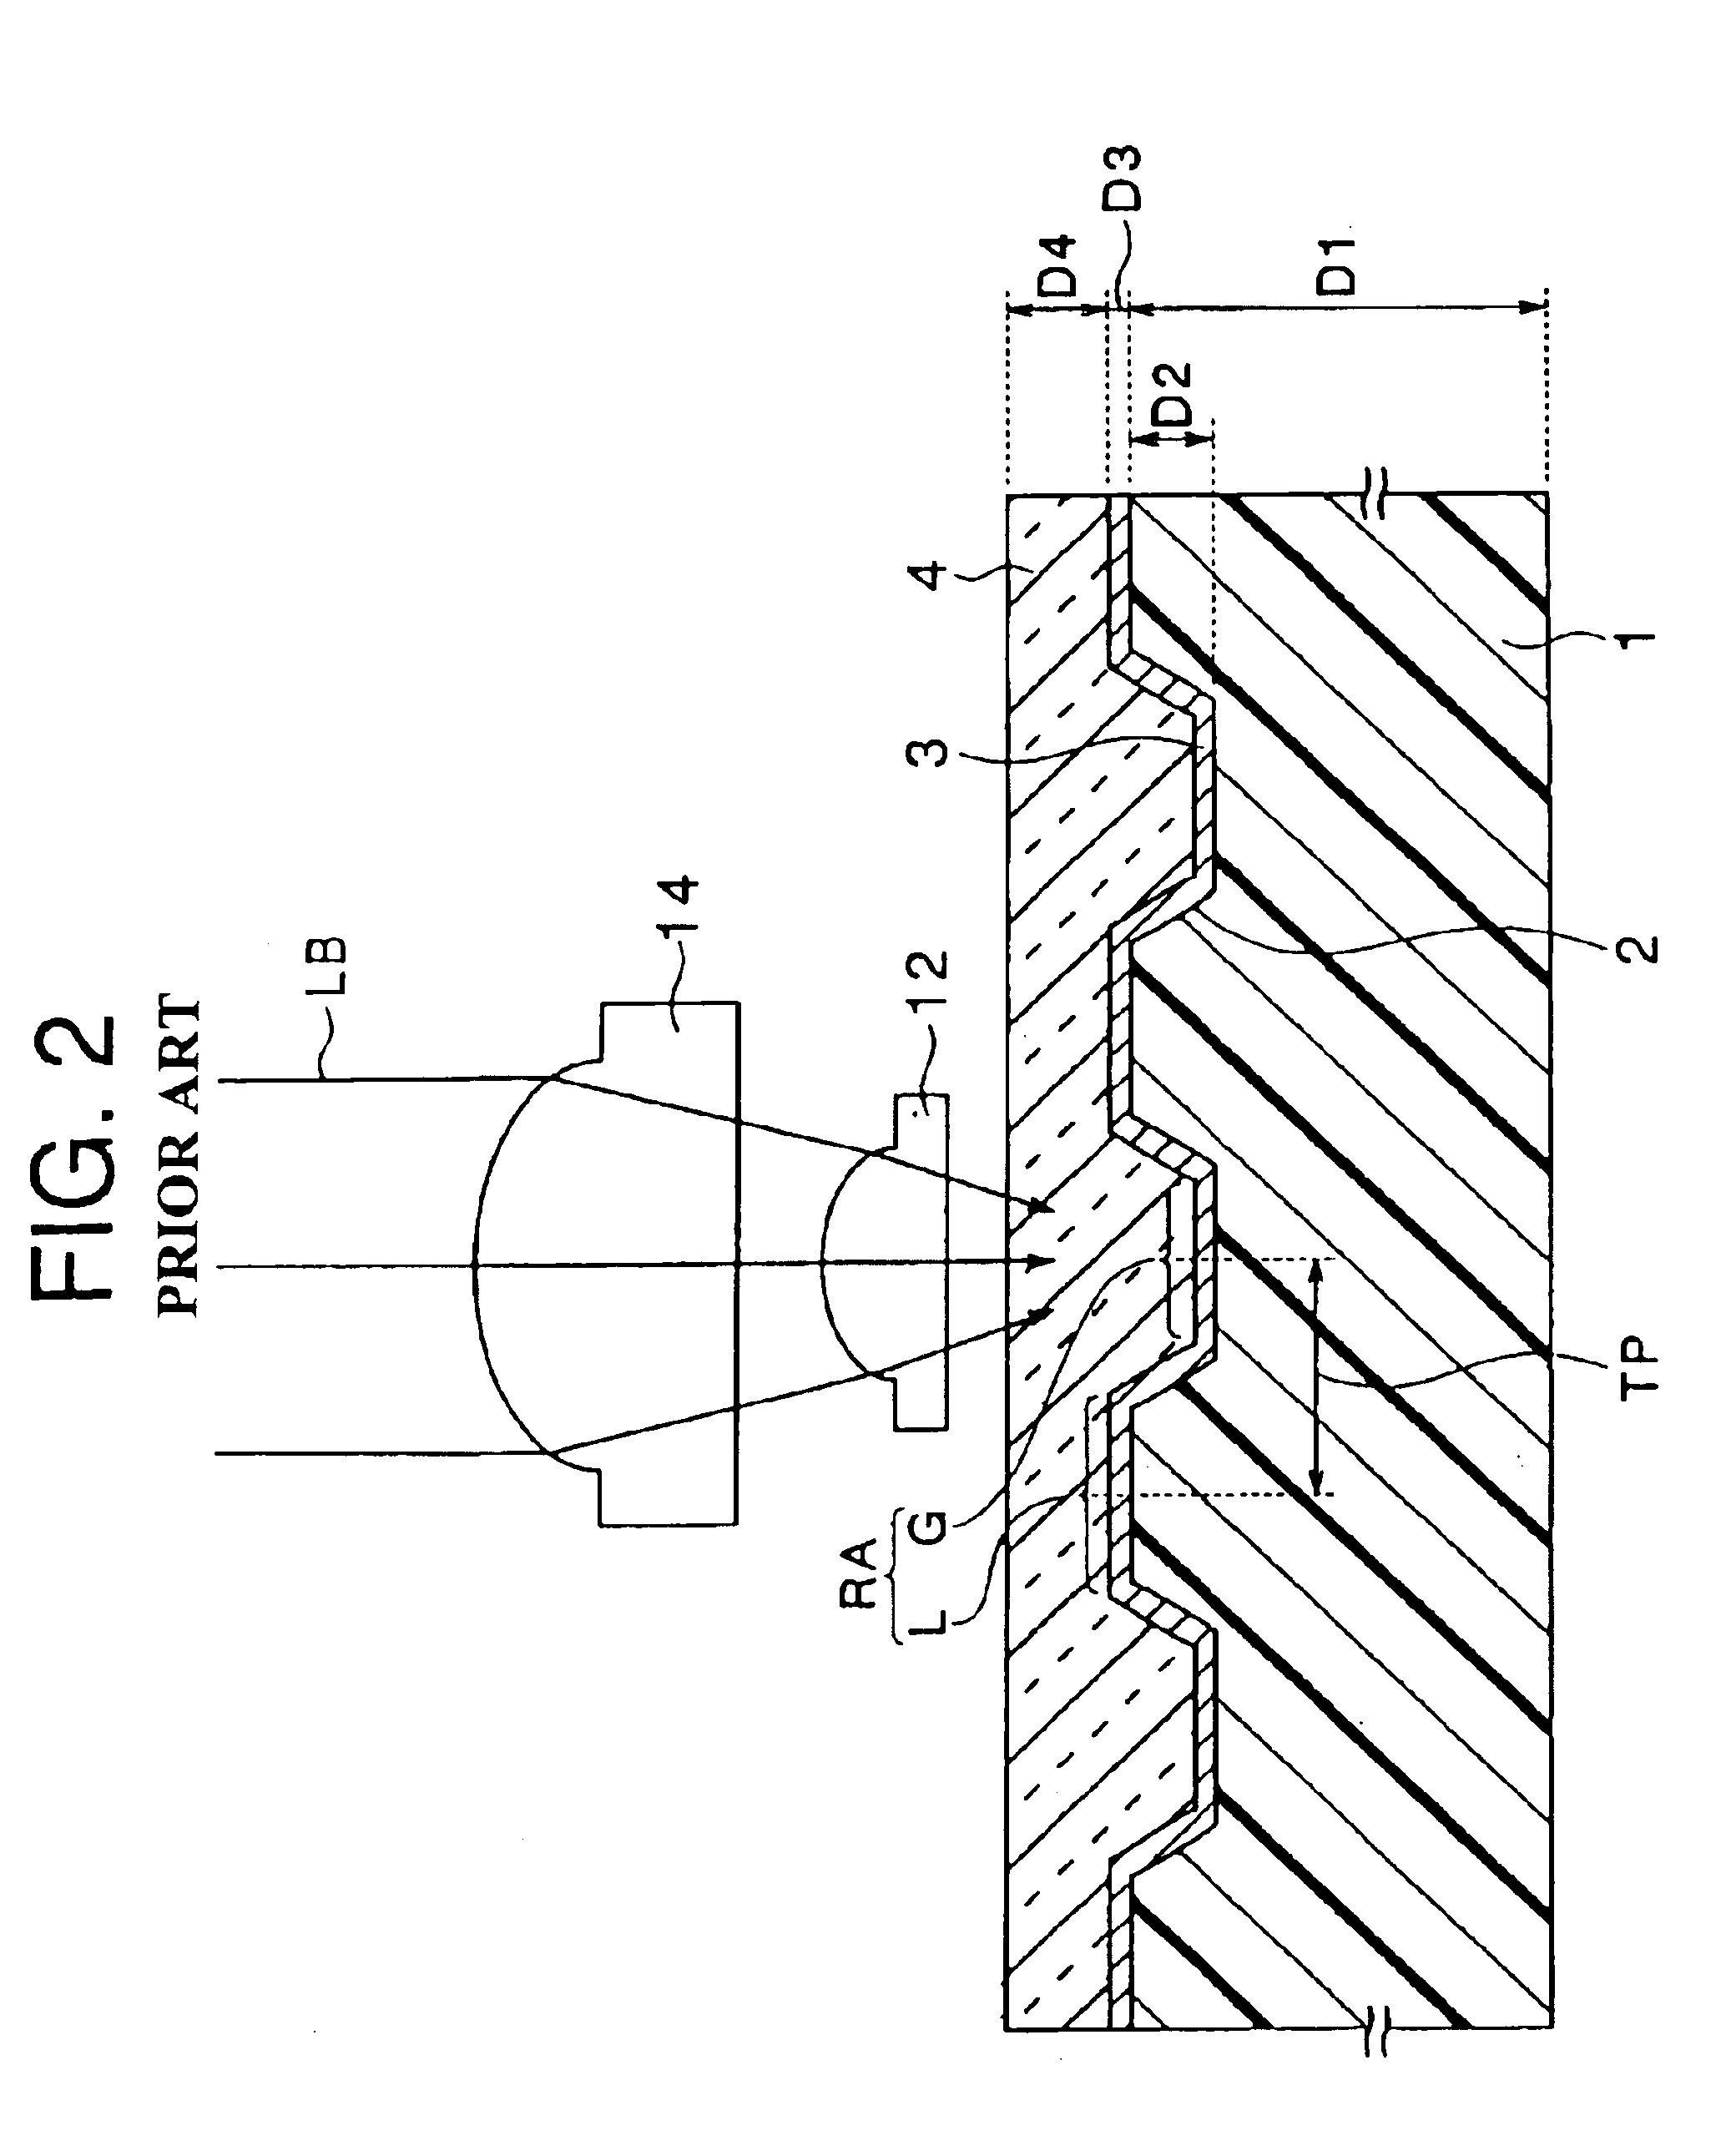 Optical recording medium with high density track pitch and optical disk device for recording and playback of the same